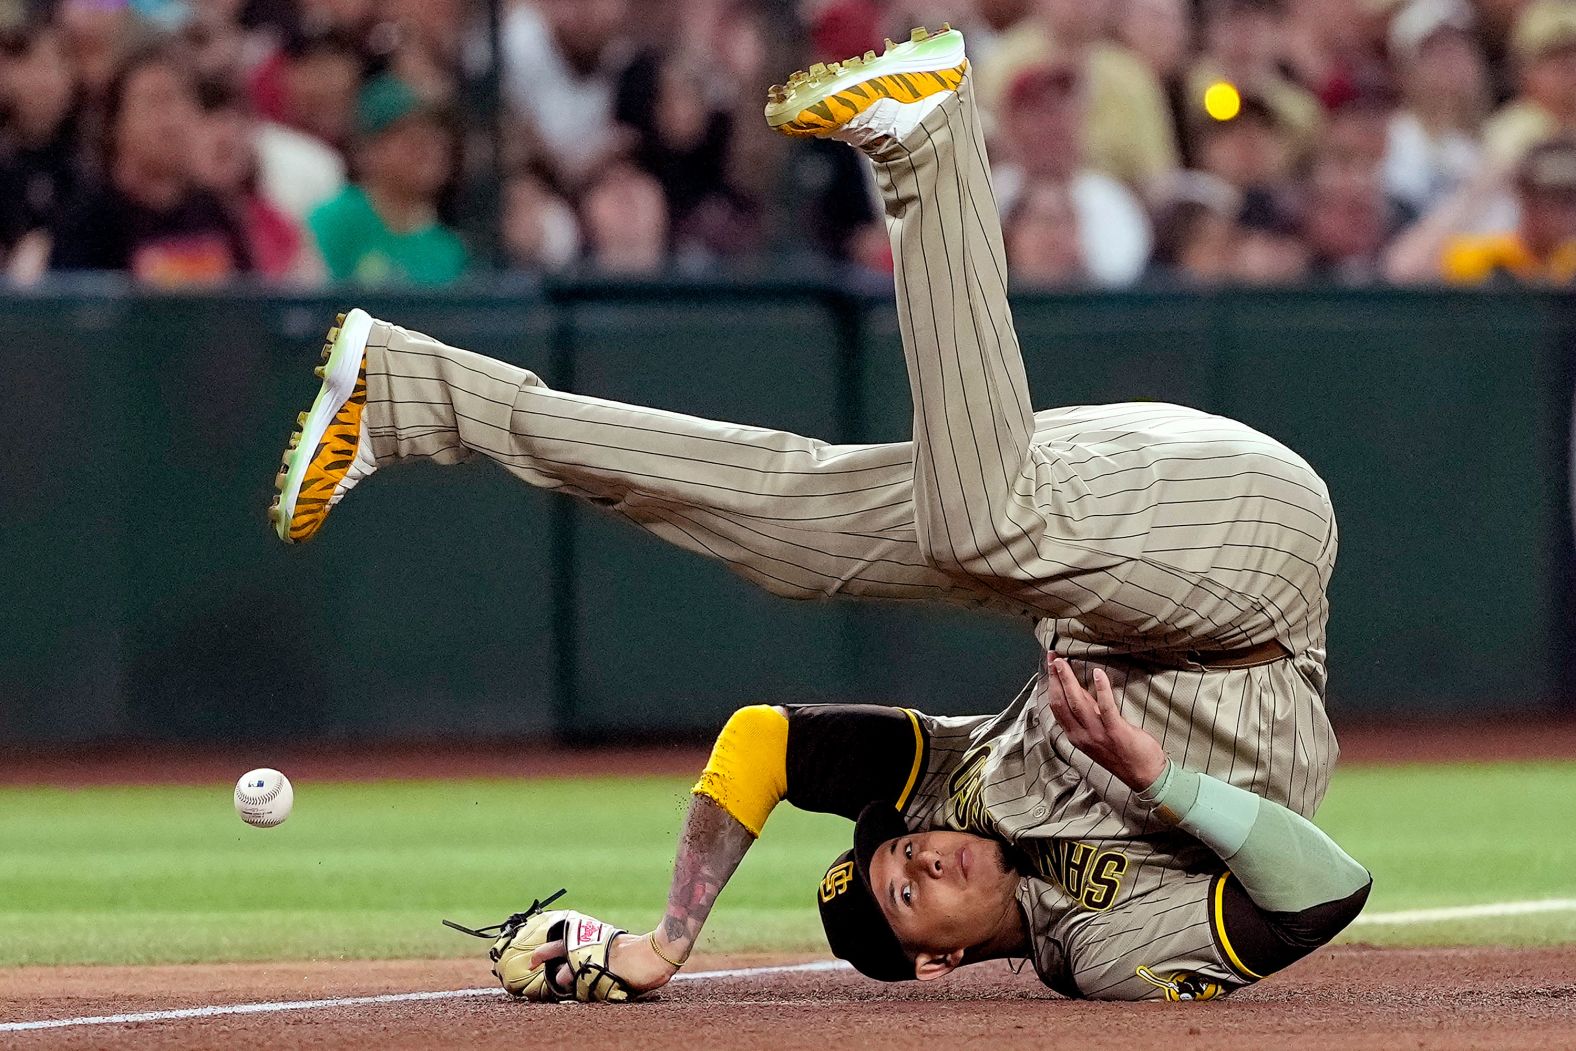 San Diego Padres third baseman Manny Machado falls while trying to field a ball during a Major League Baseball game in Phoenix on Saturday, May 4.